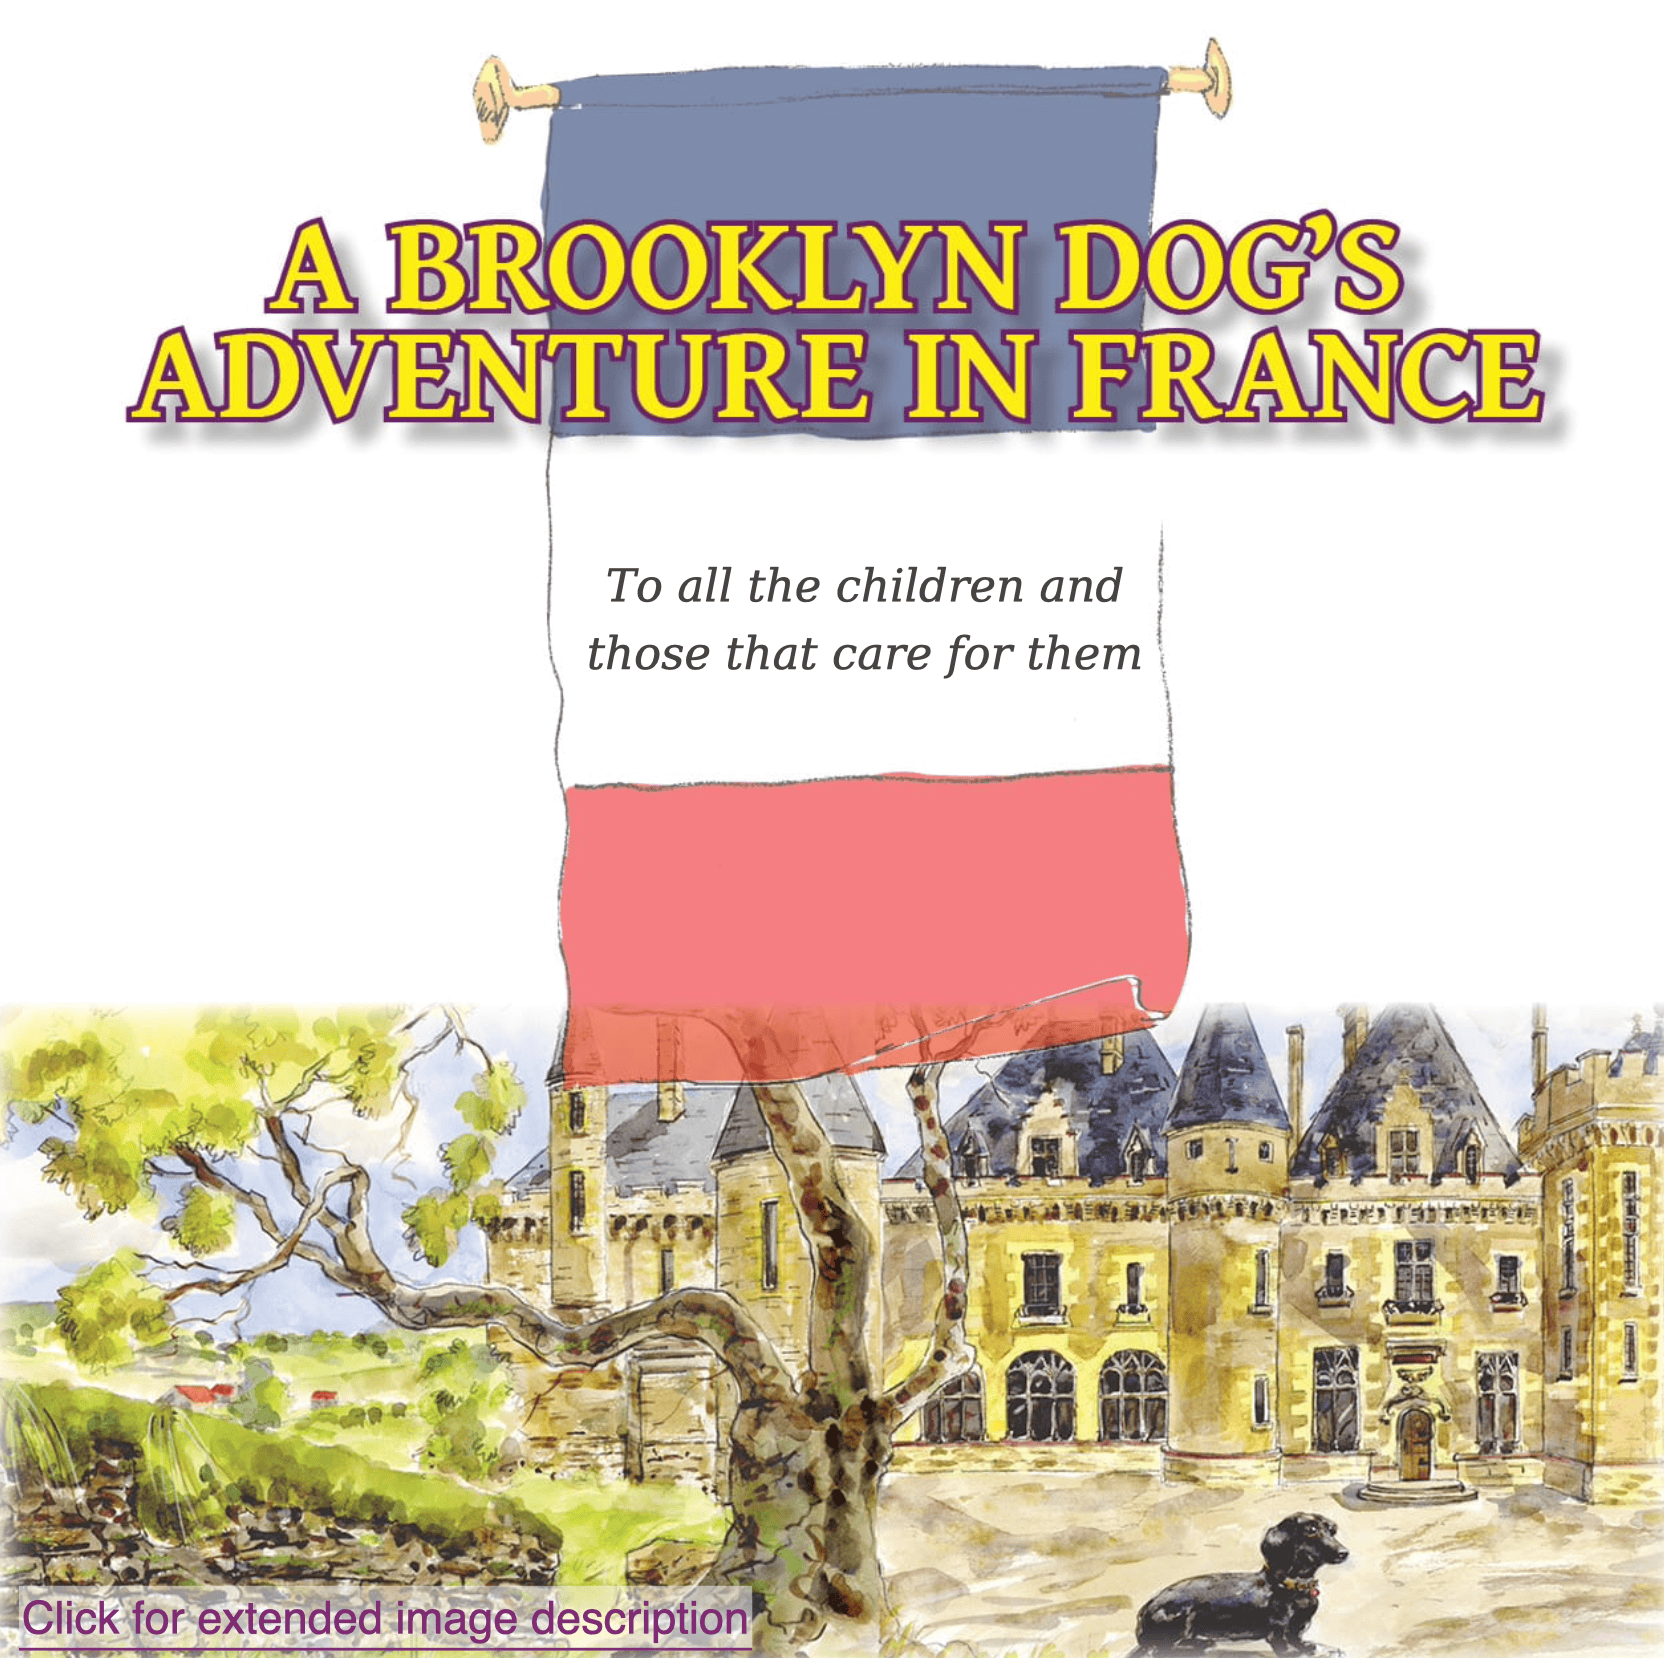 Half-title of A Brooklyn Dog's Adventures in France